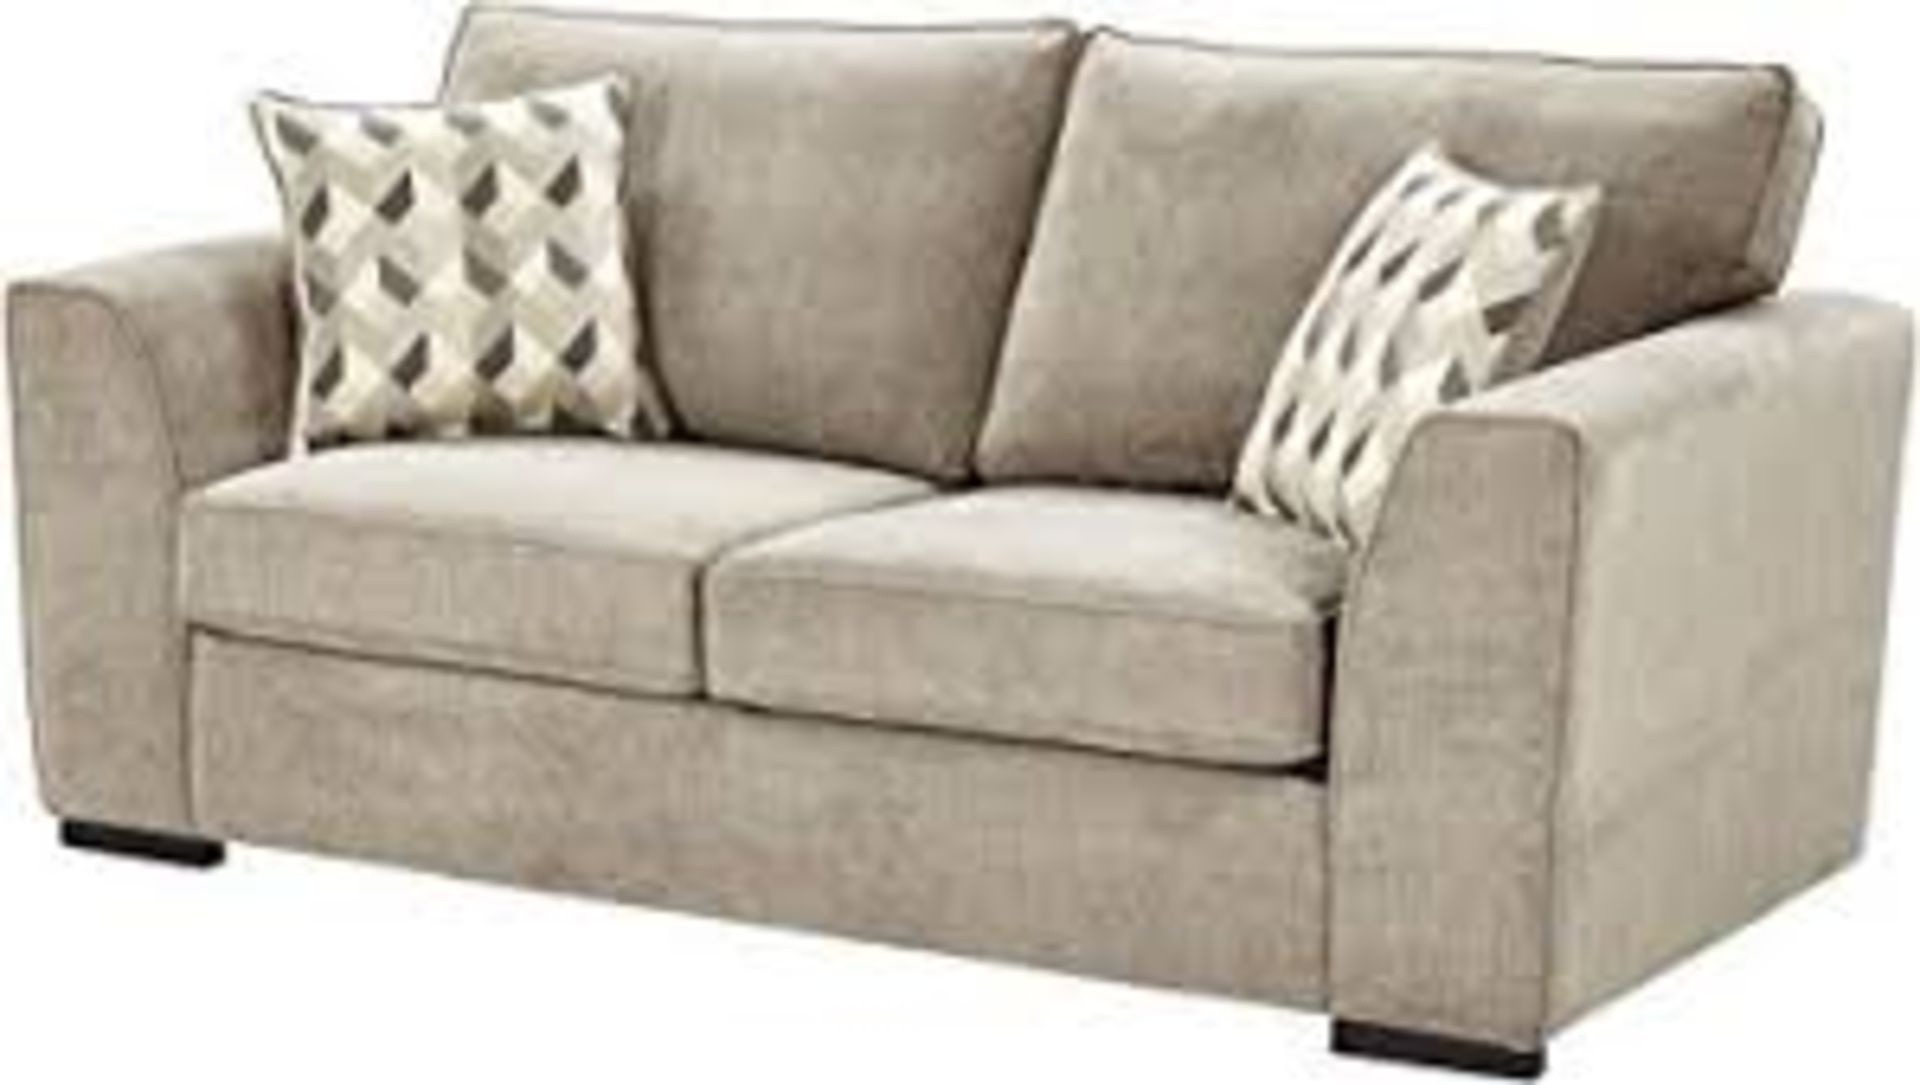 1 BRAND NEW BAGGED BOSTON MEDIUM 2.5 SEATER SOFA IN TAUPE / CTS07888 (VIEWING HIGHLY RECOMMENDED)